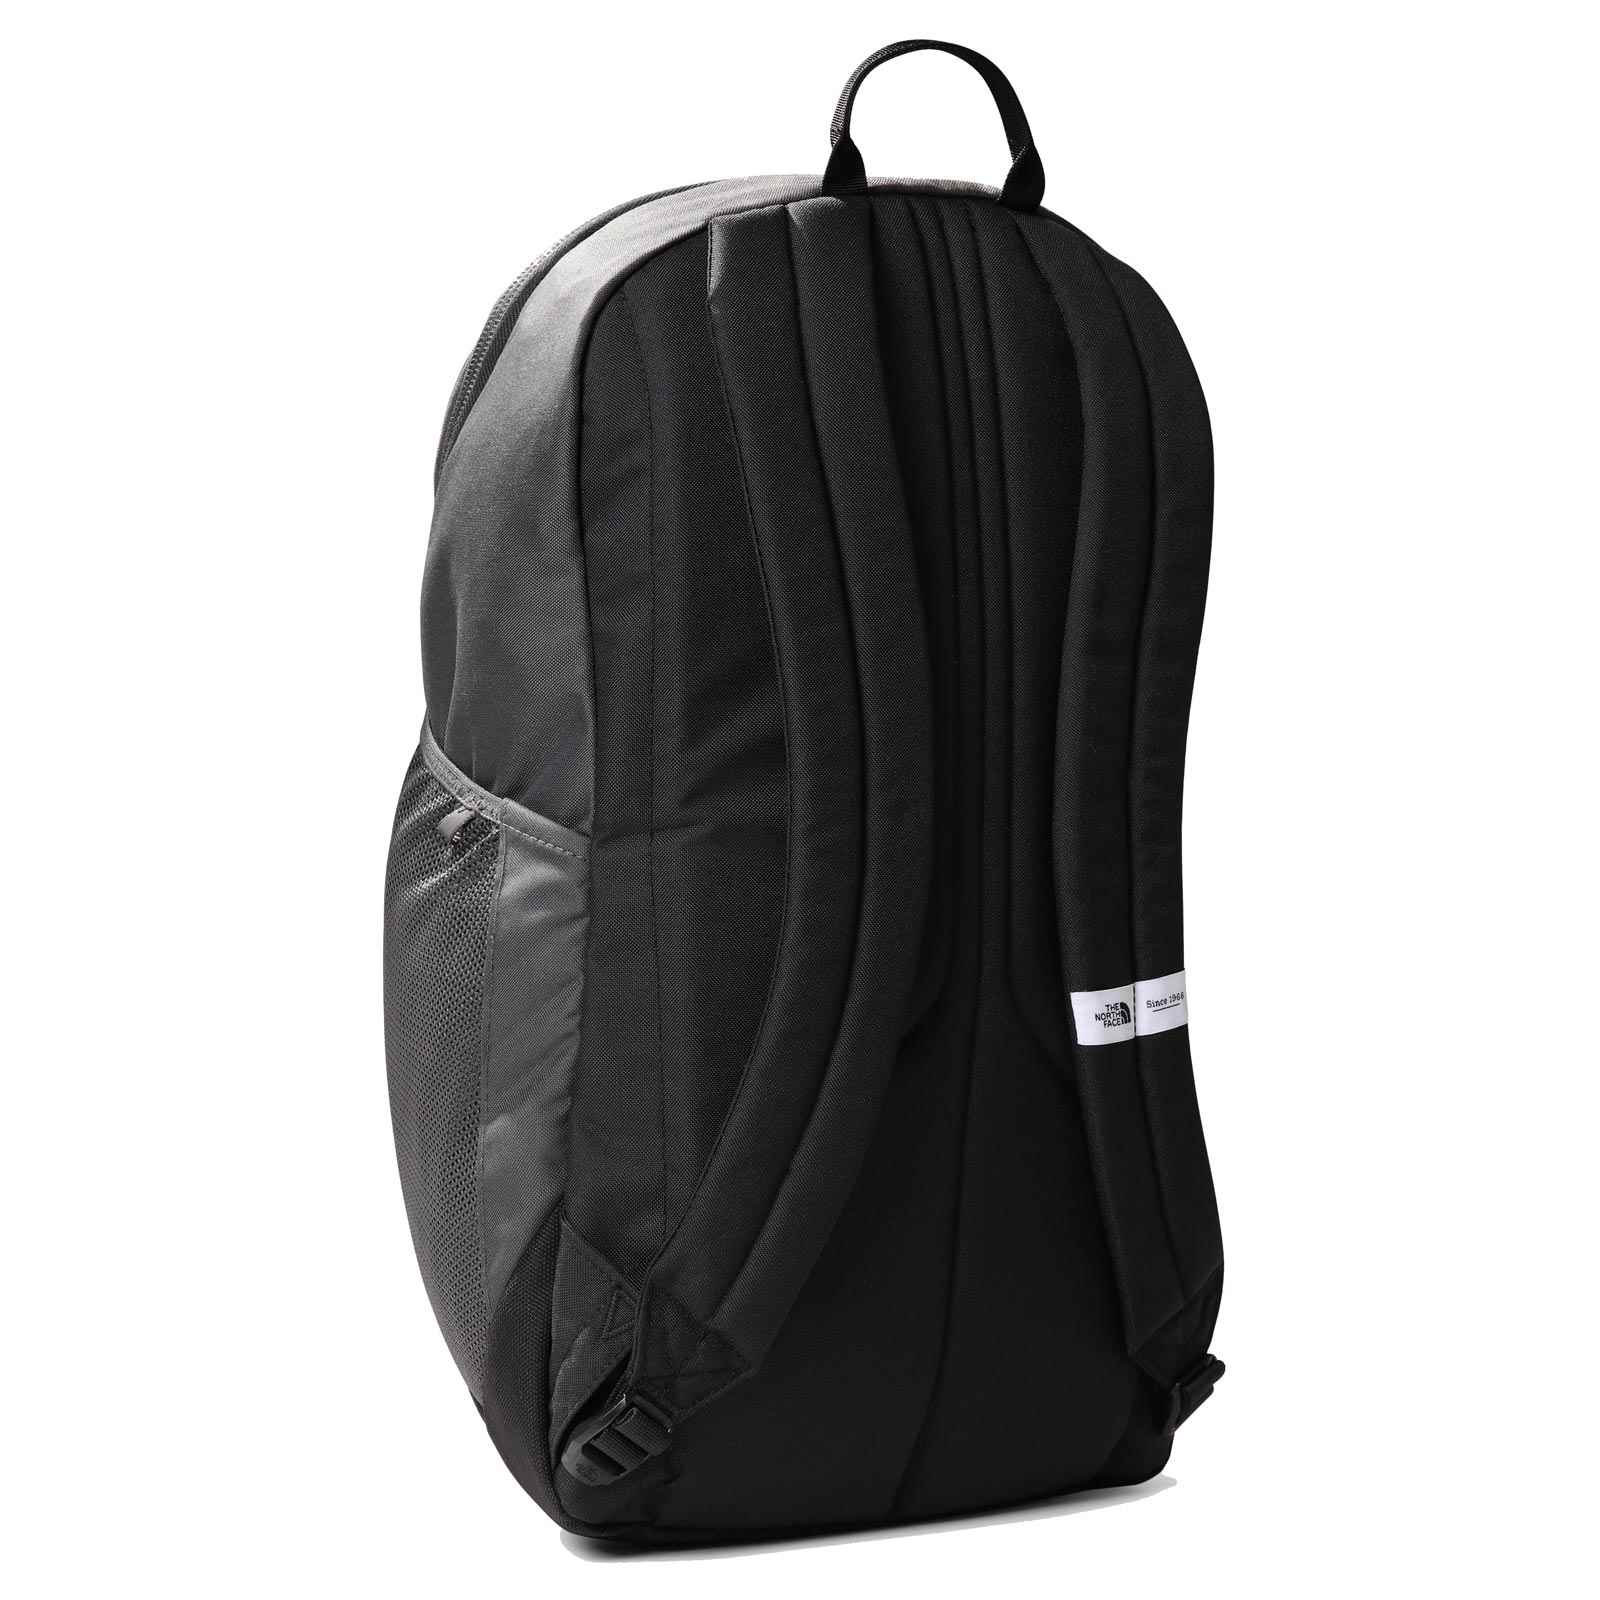 THE NORTH FACE RODEY BACKPACK